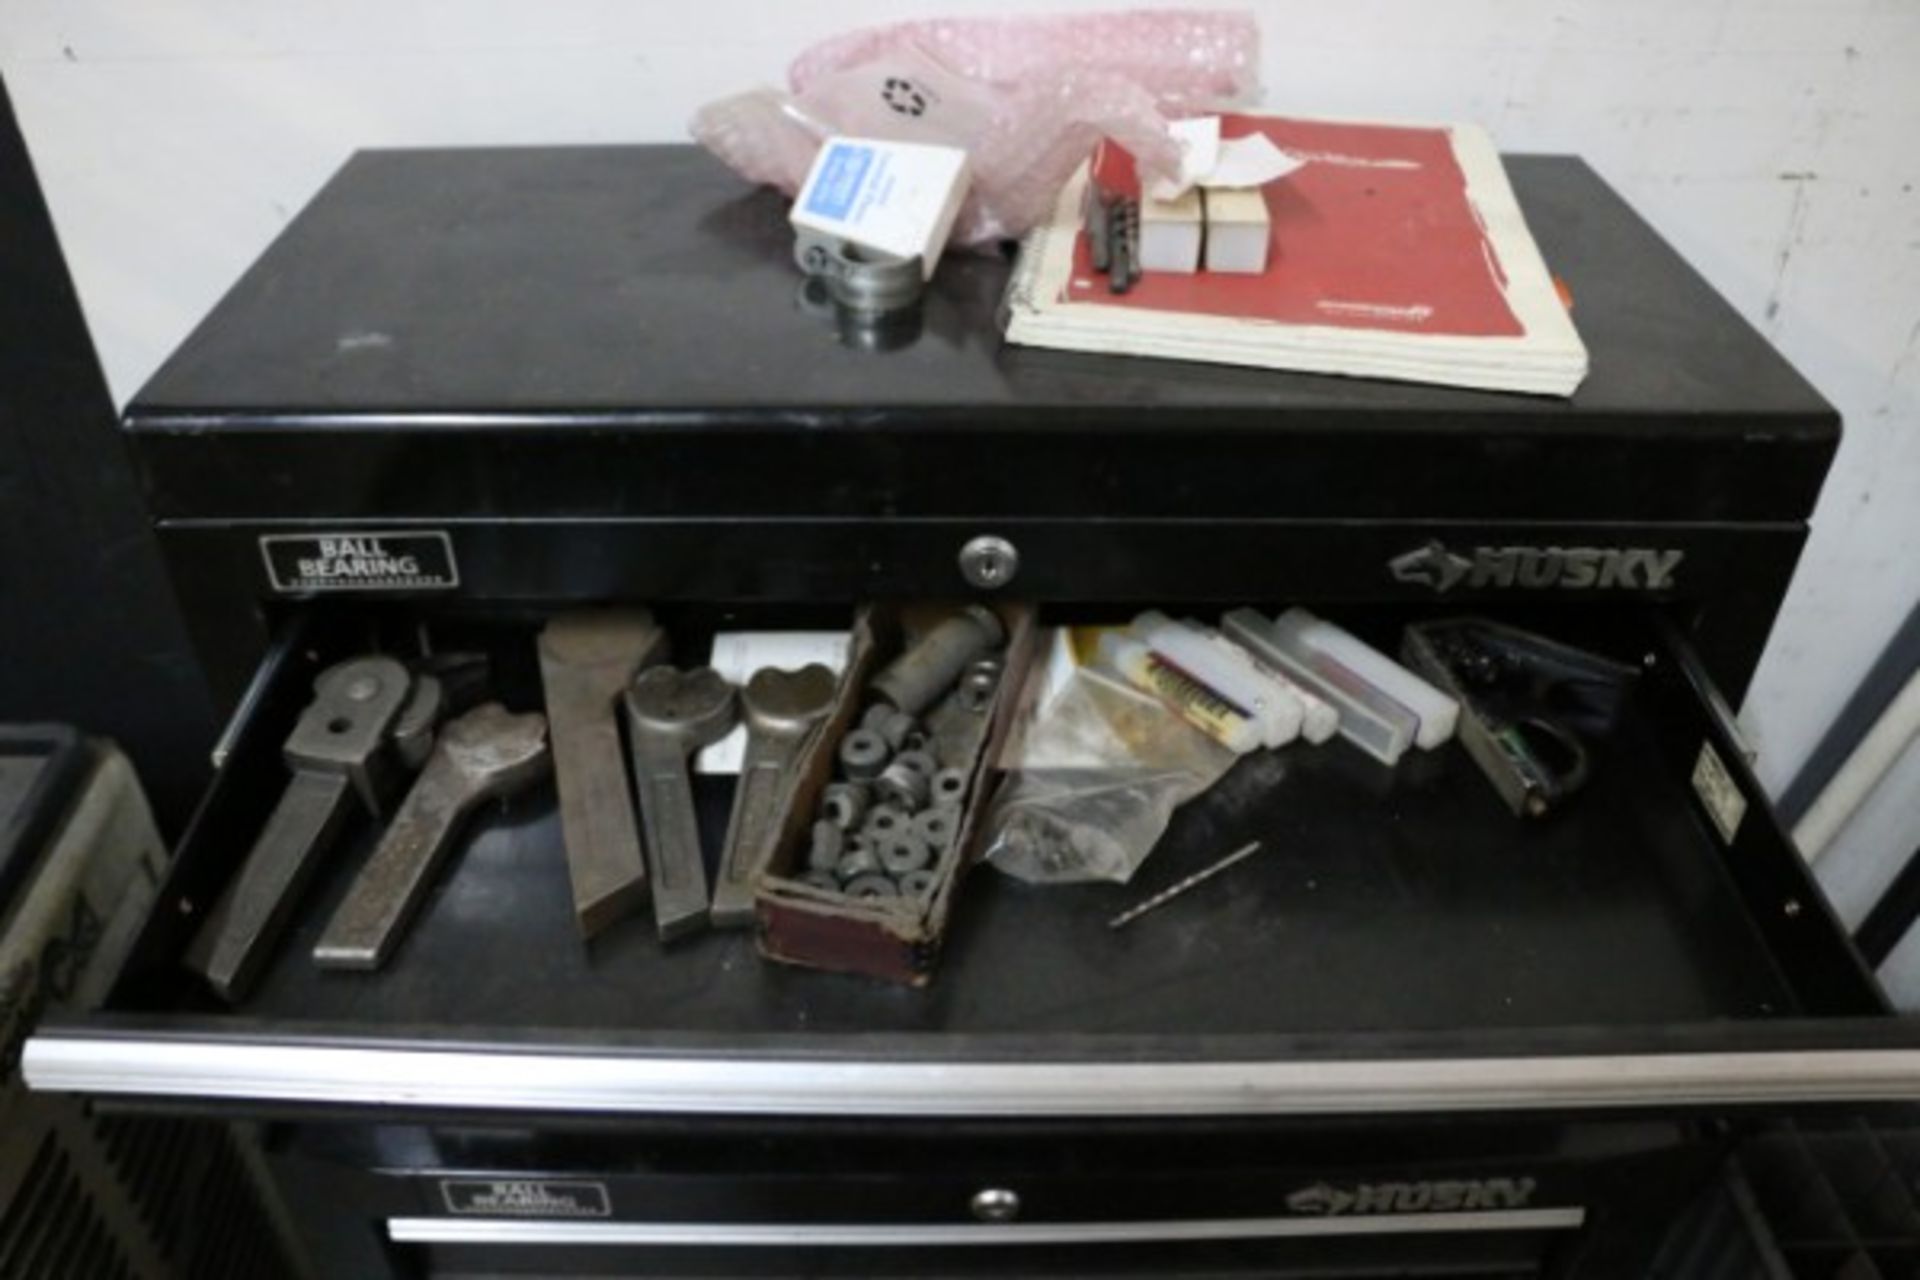 Husky Ball Bearing 6 Drawer Tool Cabinet, with Content - Image 2 of 7